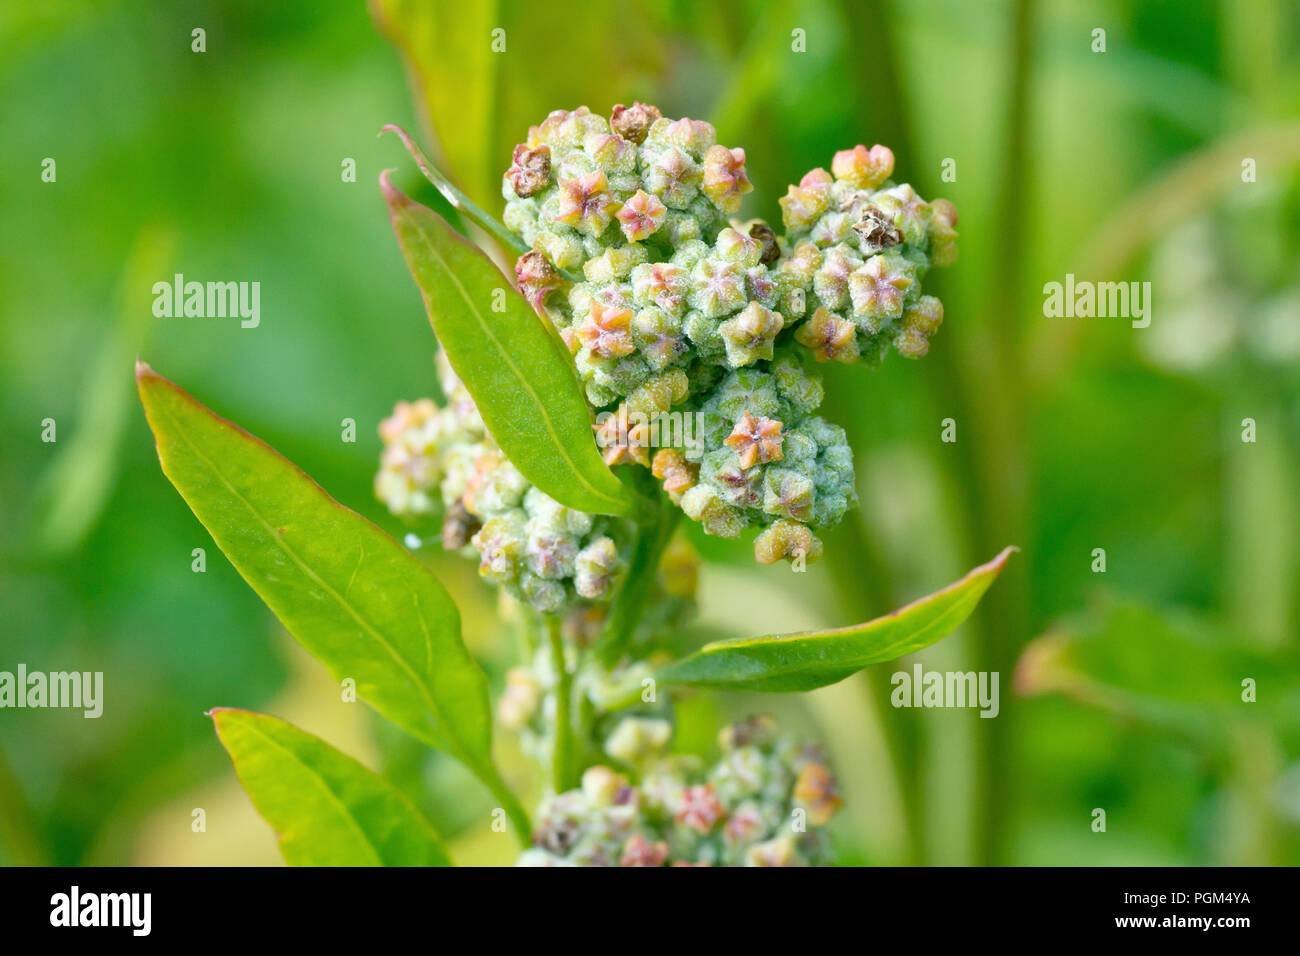 Fat-hen (chenopodium album), close up of the flower head and leaves. Stock Photo